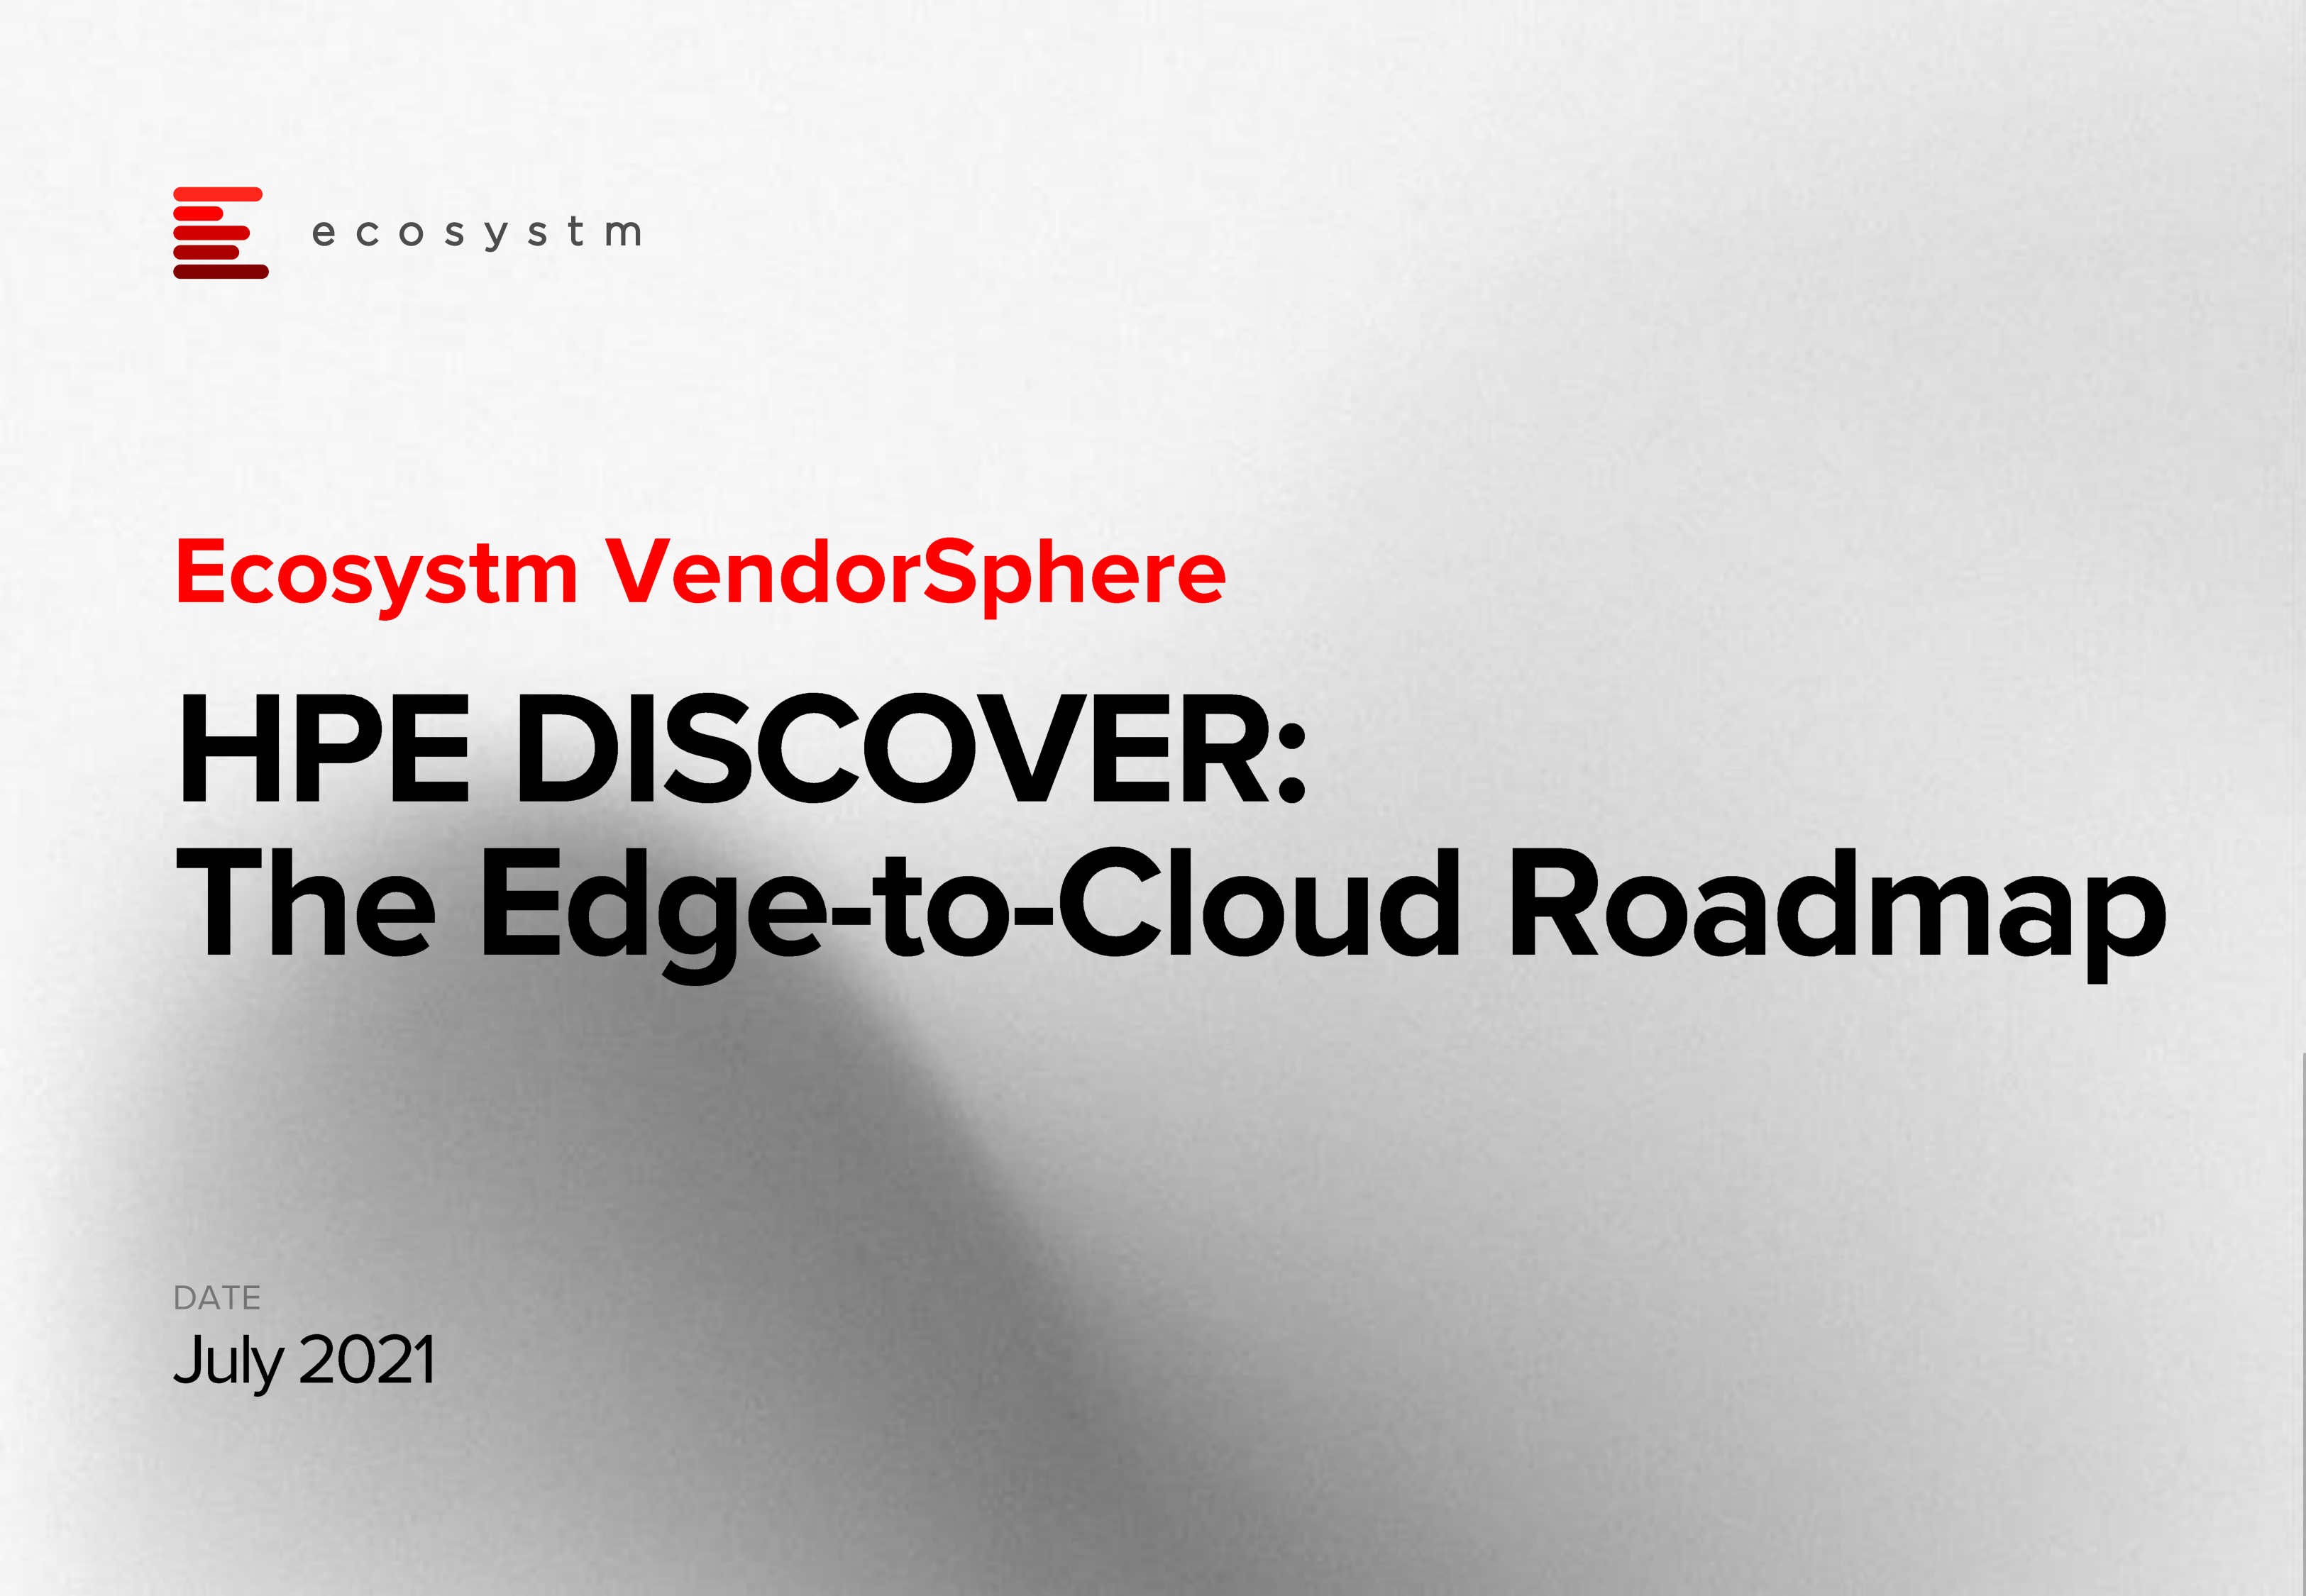 Ecosystm-VendorSphere-HPE-DISCOVER-Edge-to-cloud-roadmap-1